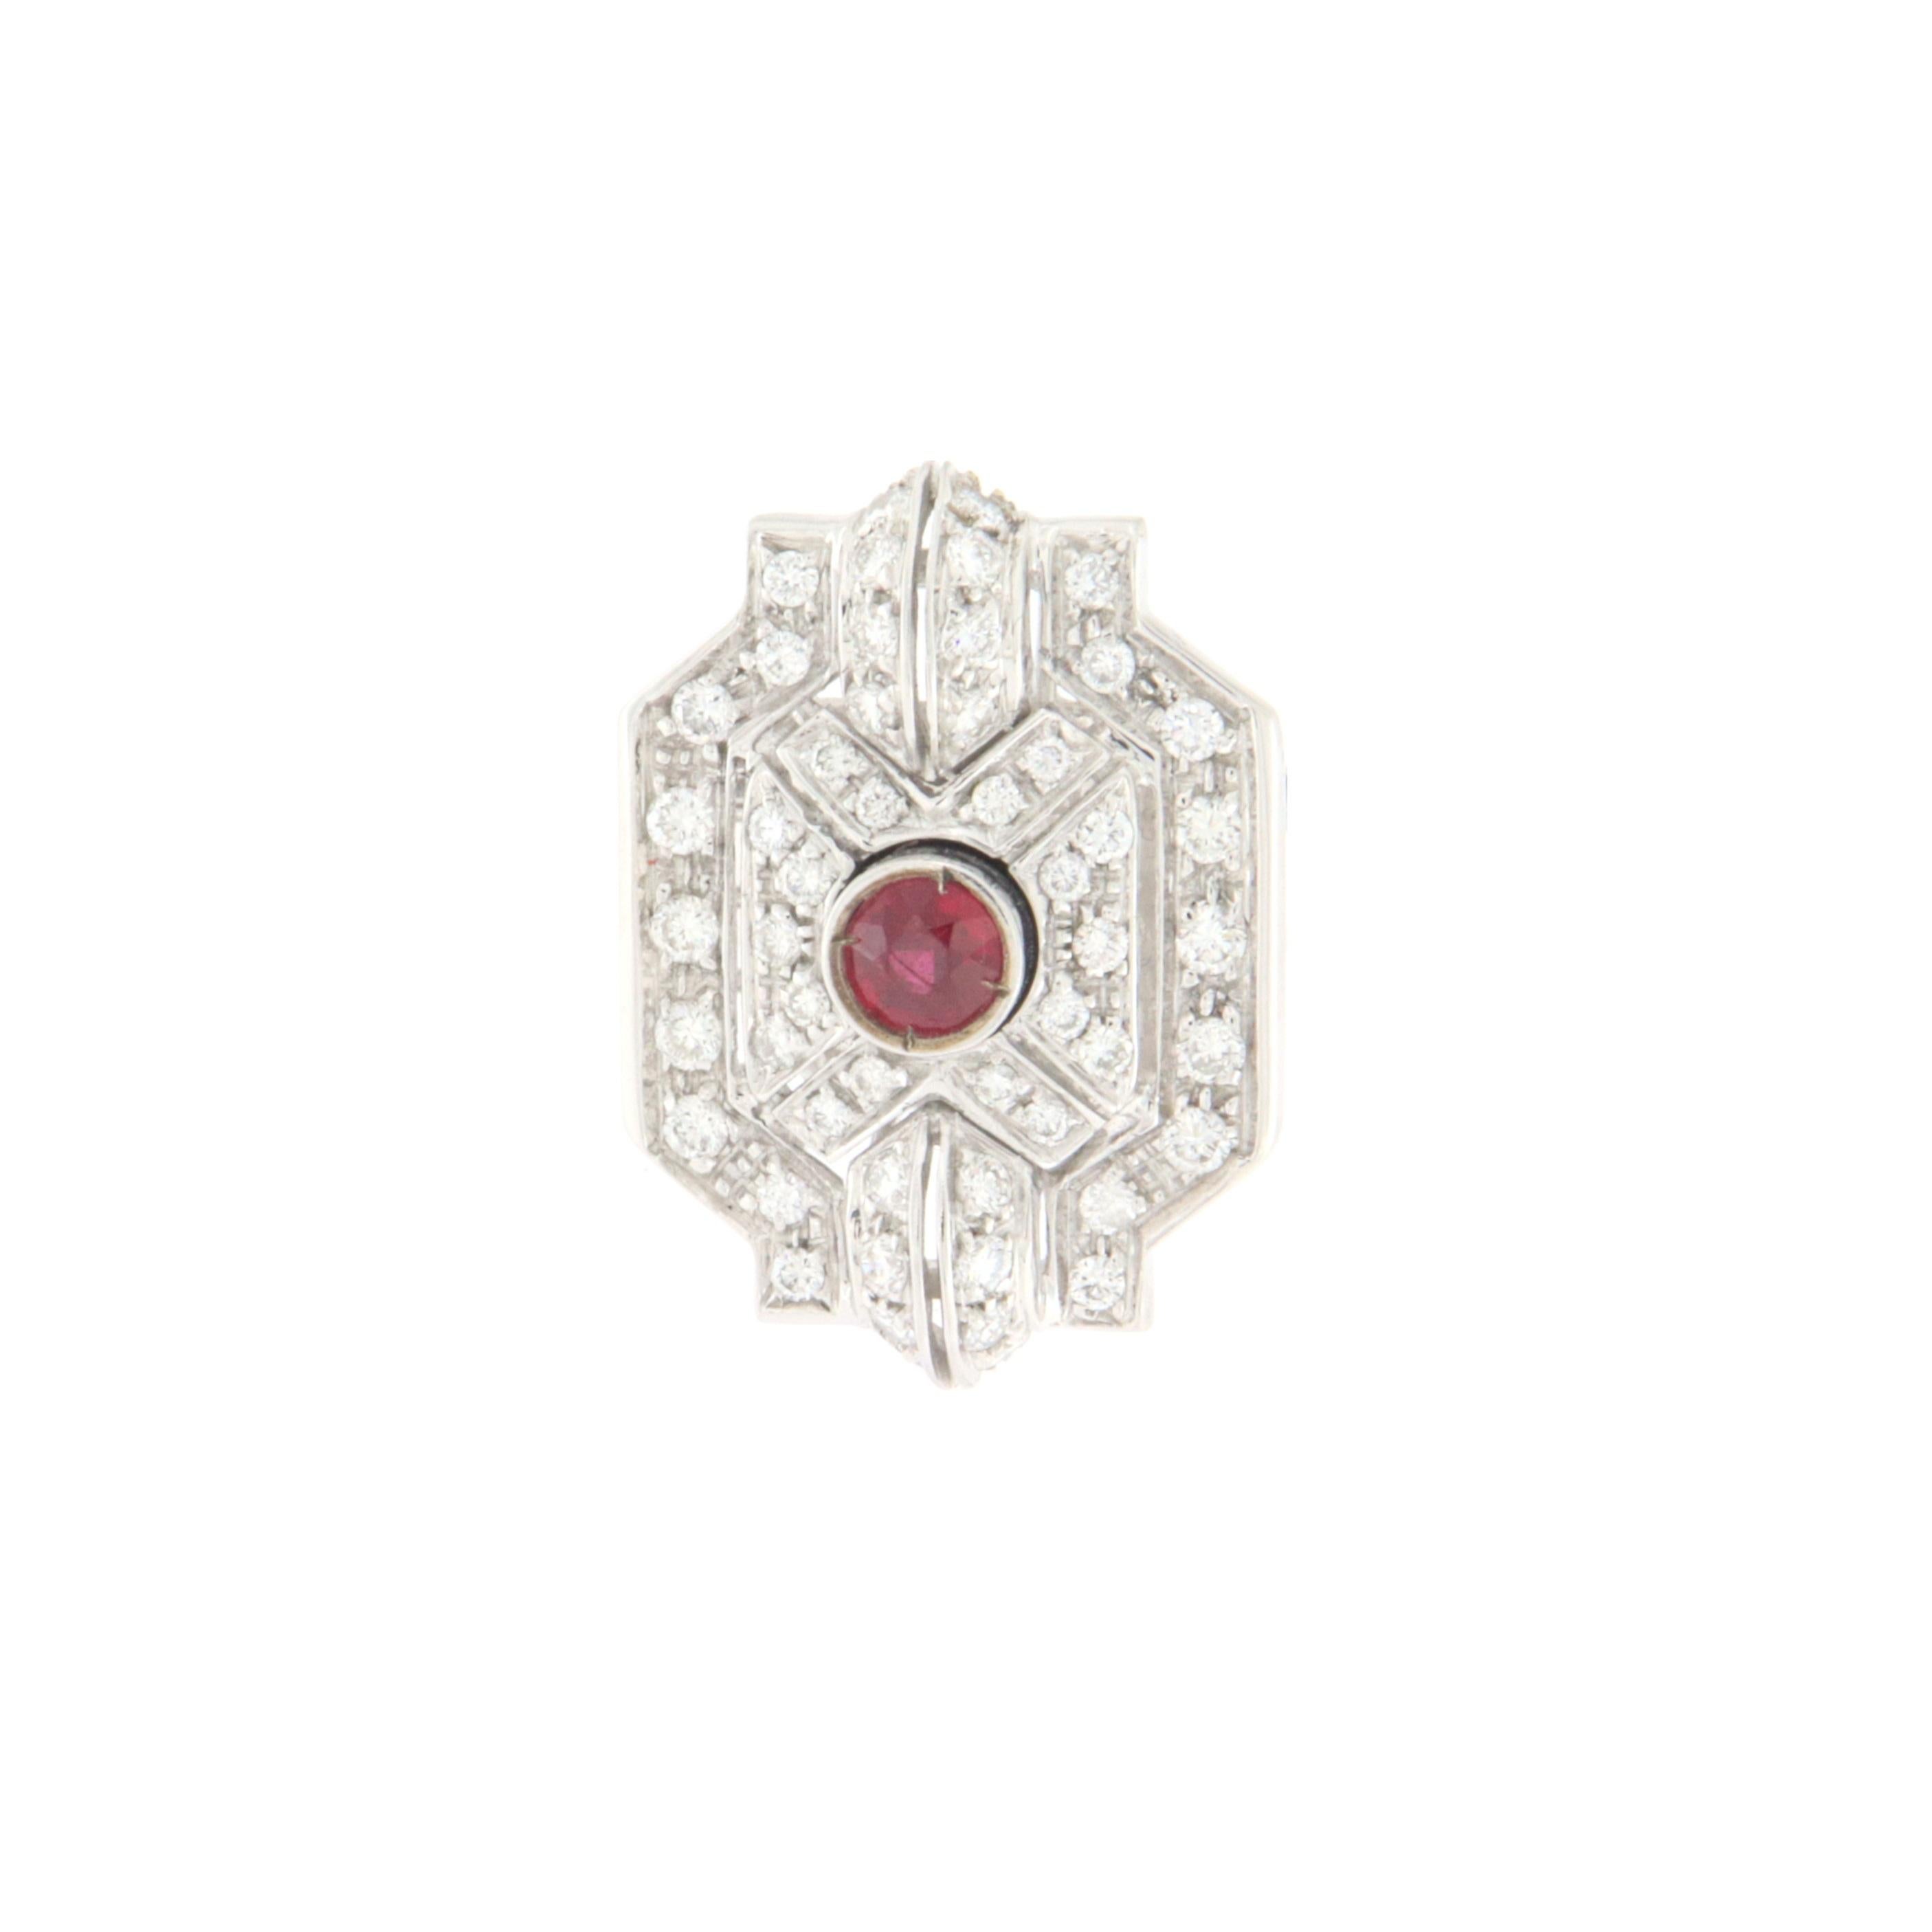 Fantastic 18 karat white gold cocktail ring.Handmade by our artisans assembled with ruby and diamonds

Ring weight 11.50 grams
Diamonds weight 1.35 karat
Ruby weight 0.51 karat
Ring size 7.75 US 16 ITA 
(all rings are can be resized)